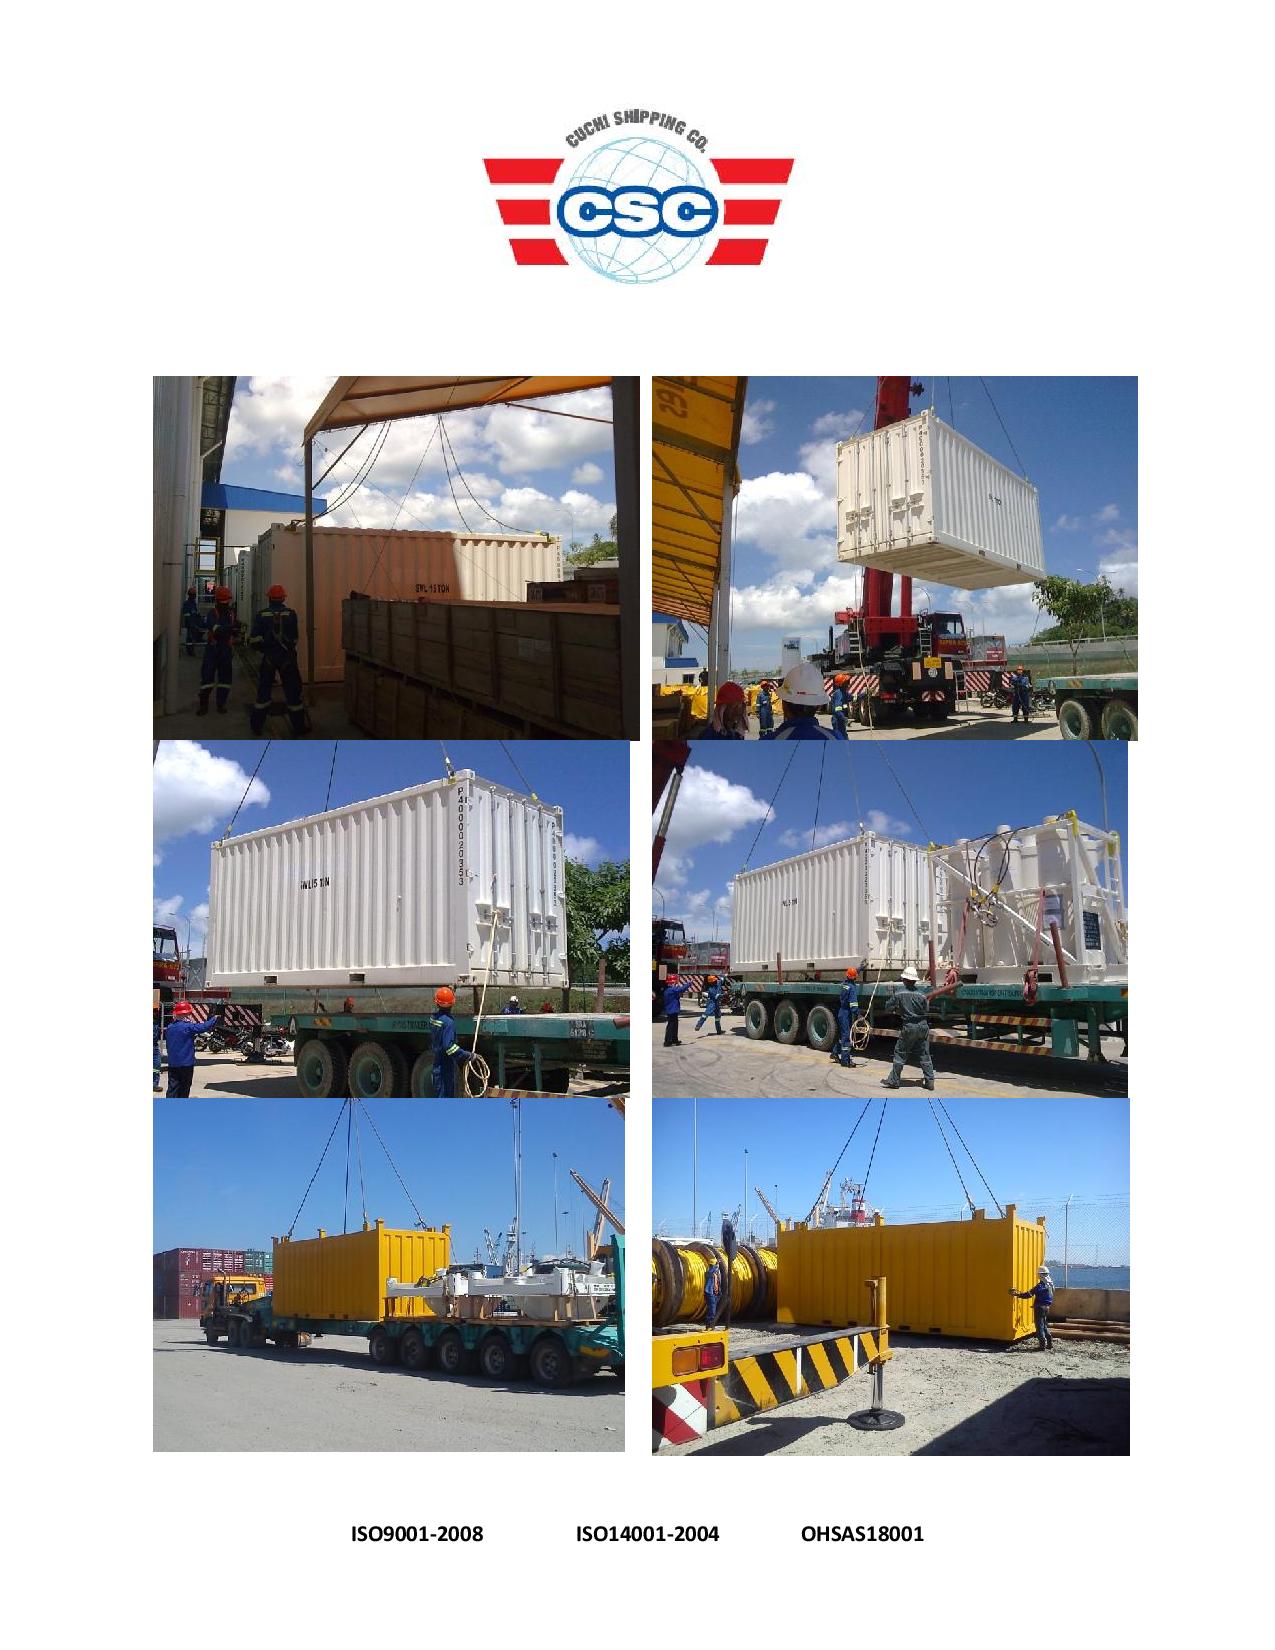 2013 ORIGIN ENERGY EXPLORATORY DRILLING PROJECT-MOVING EQUIPMENTS FROM LABUAN TO PTSC BASE